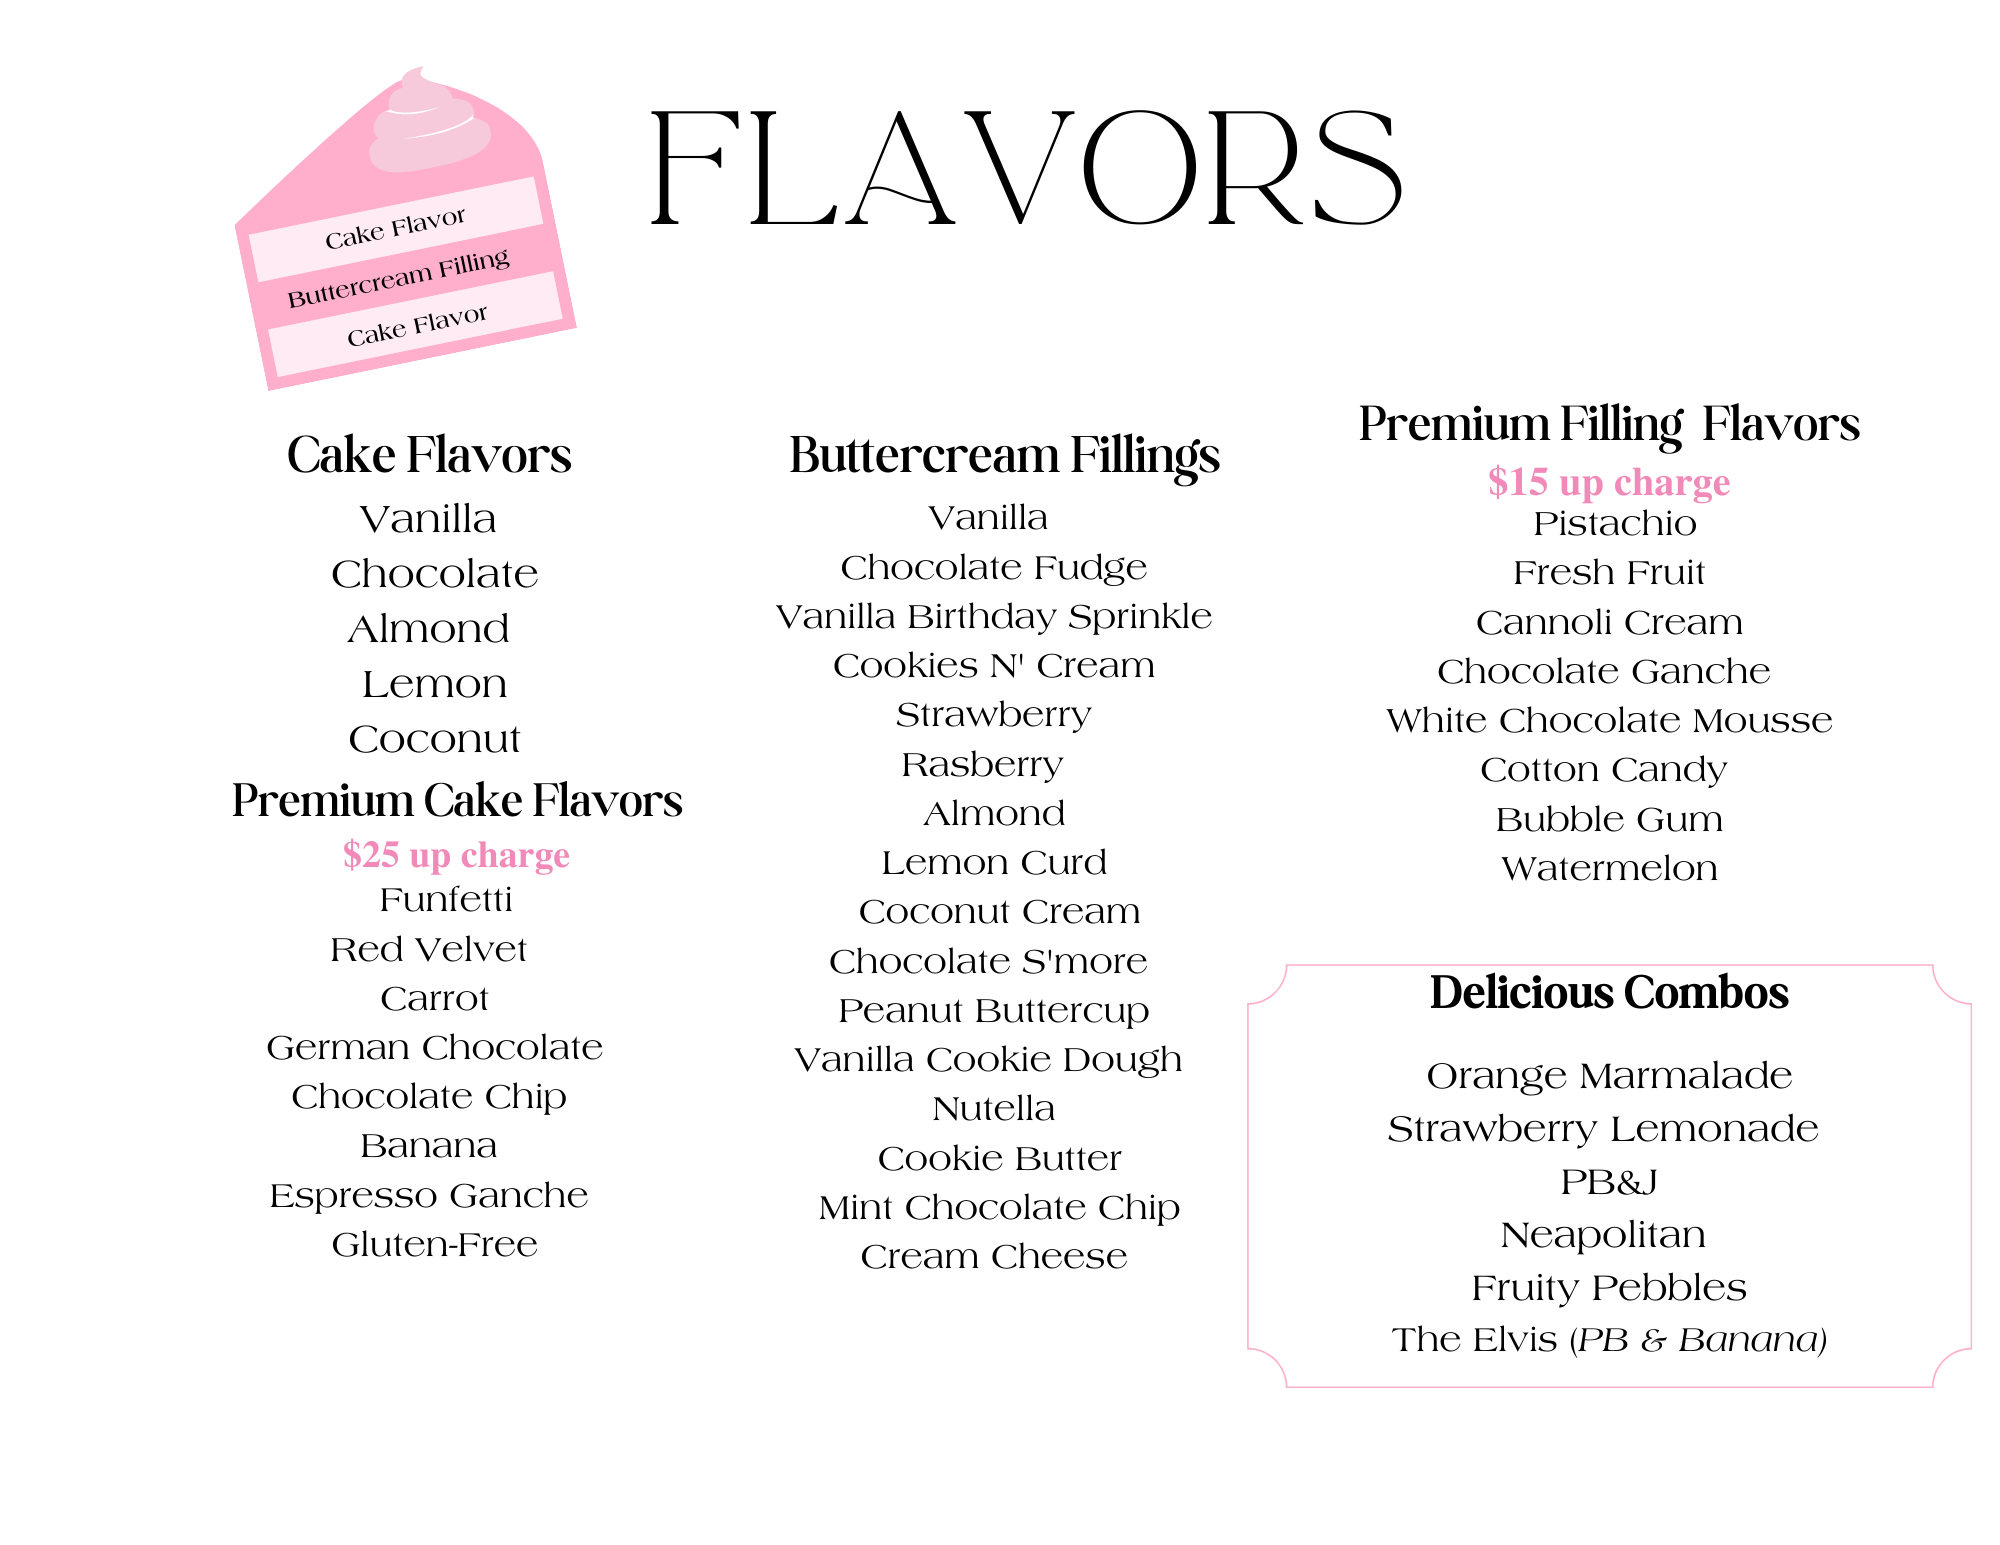 Wedding Cake Flavors: How to Pick the Perfect Cake Flavor Combo